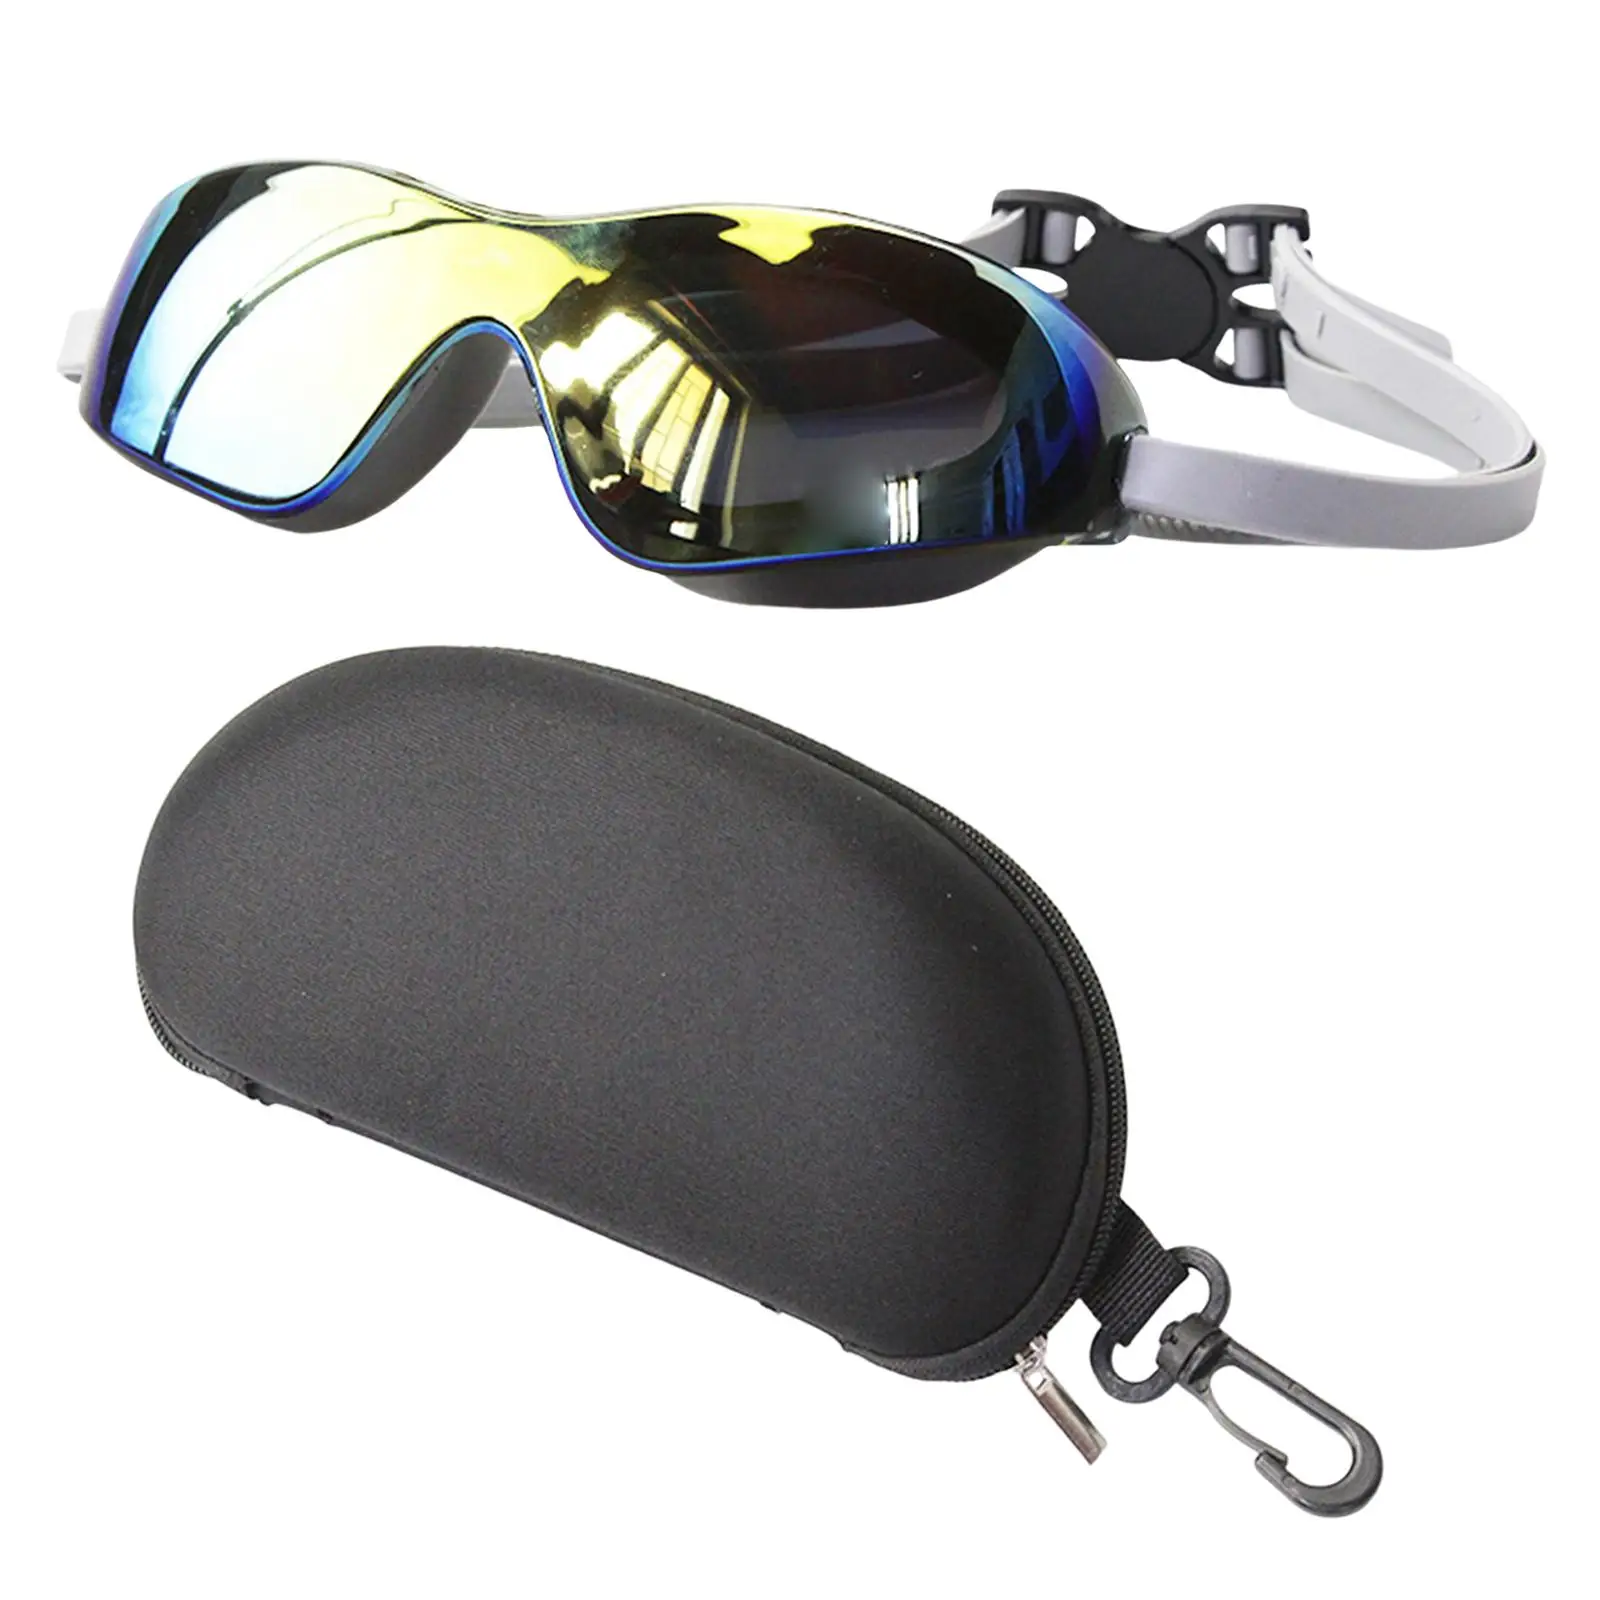 Professional Swim Glasses, Large Frame Outdoor Adjustable Waterproof Anti Skid Clear View